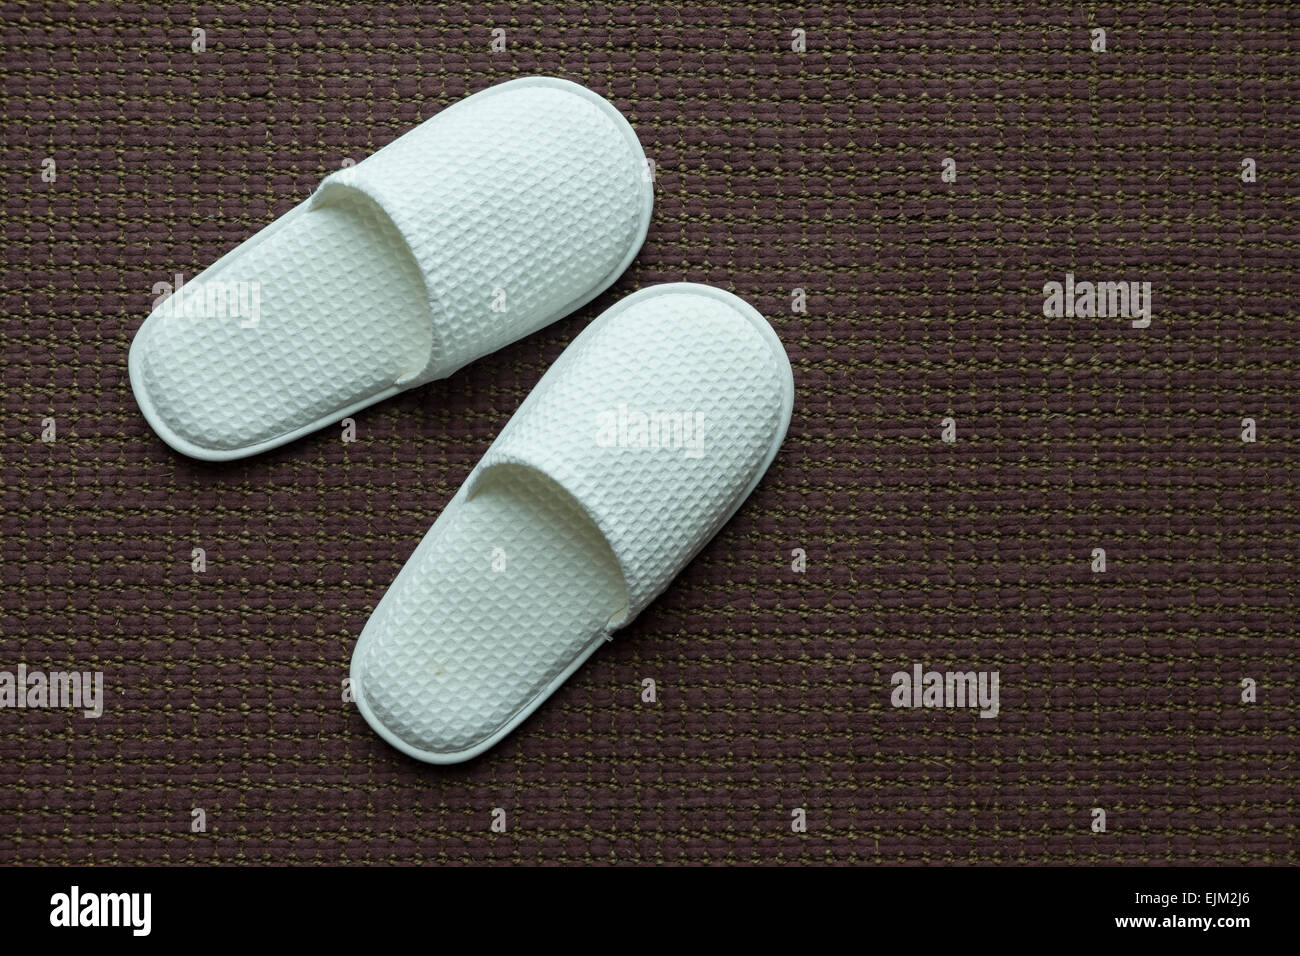 White slippers on brown carpet Stock Photo